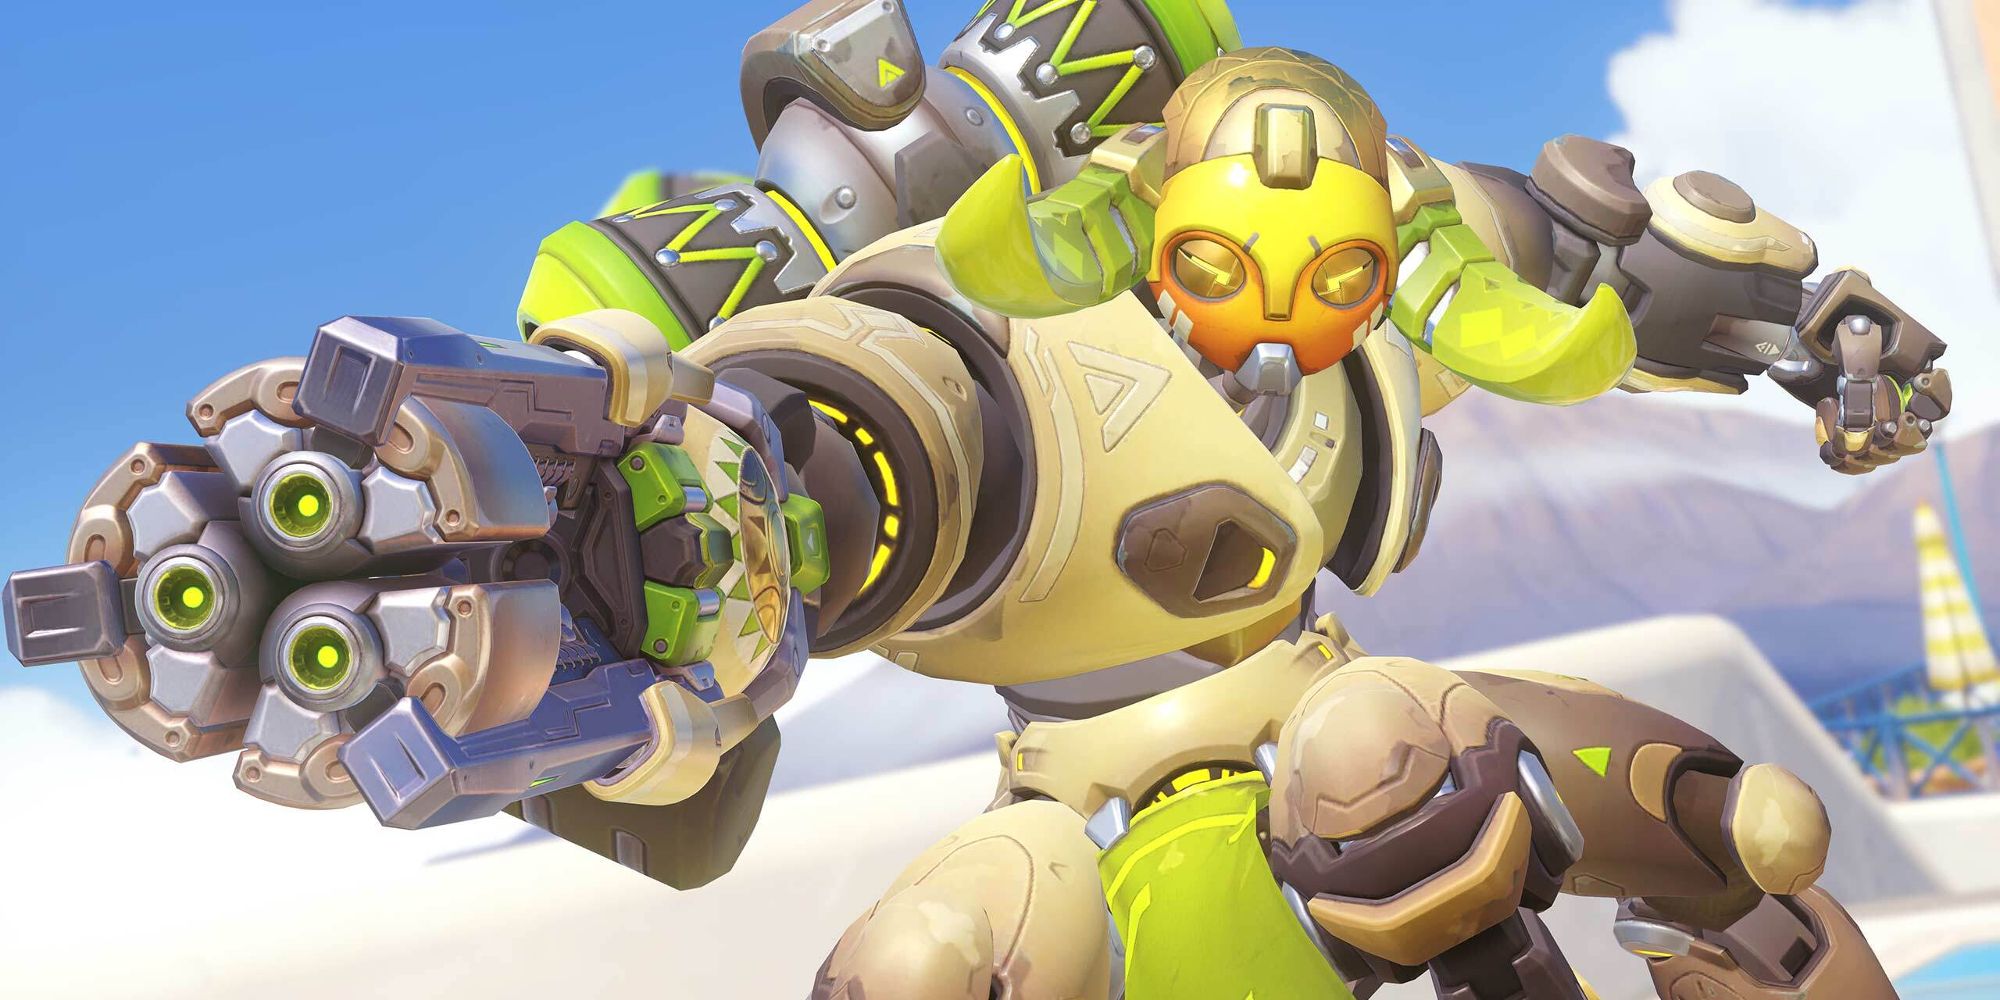 Orisa aiming her arm cannon in Overwatch 2